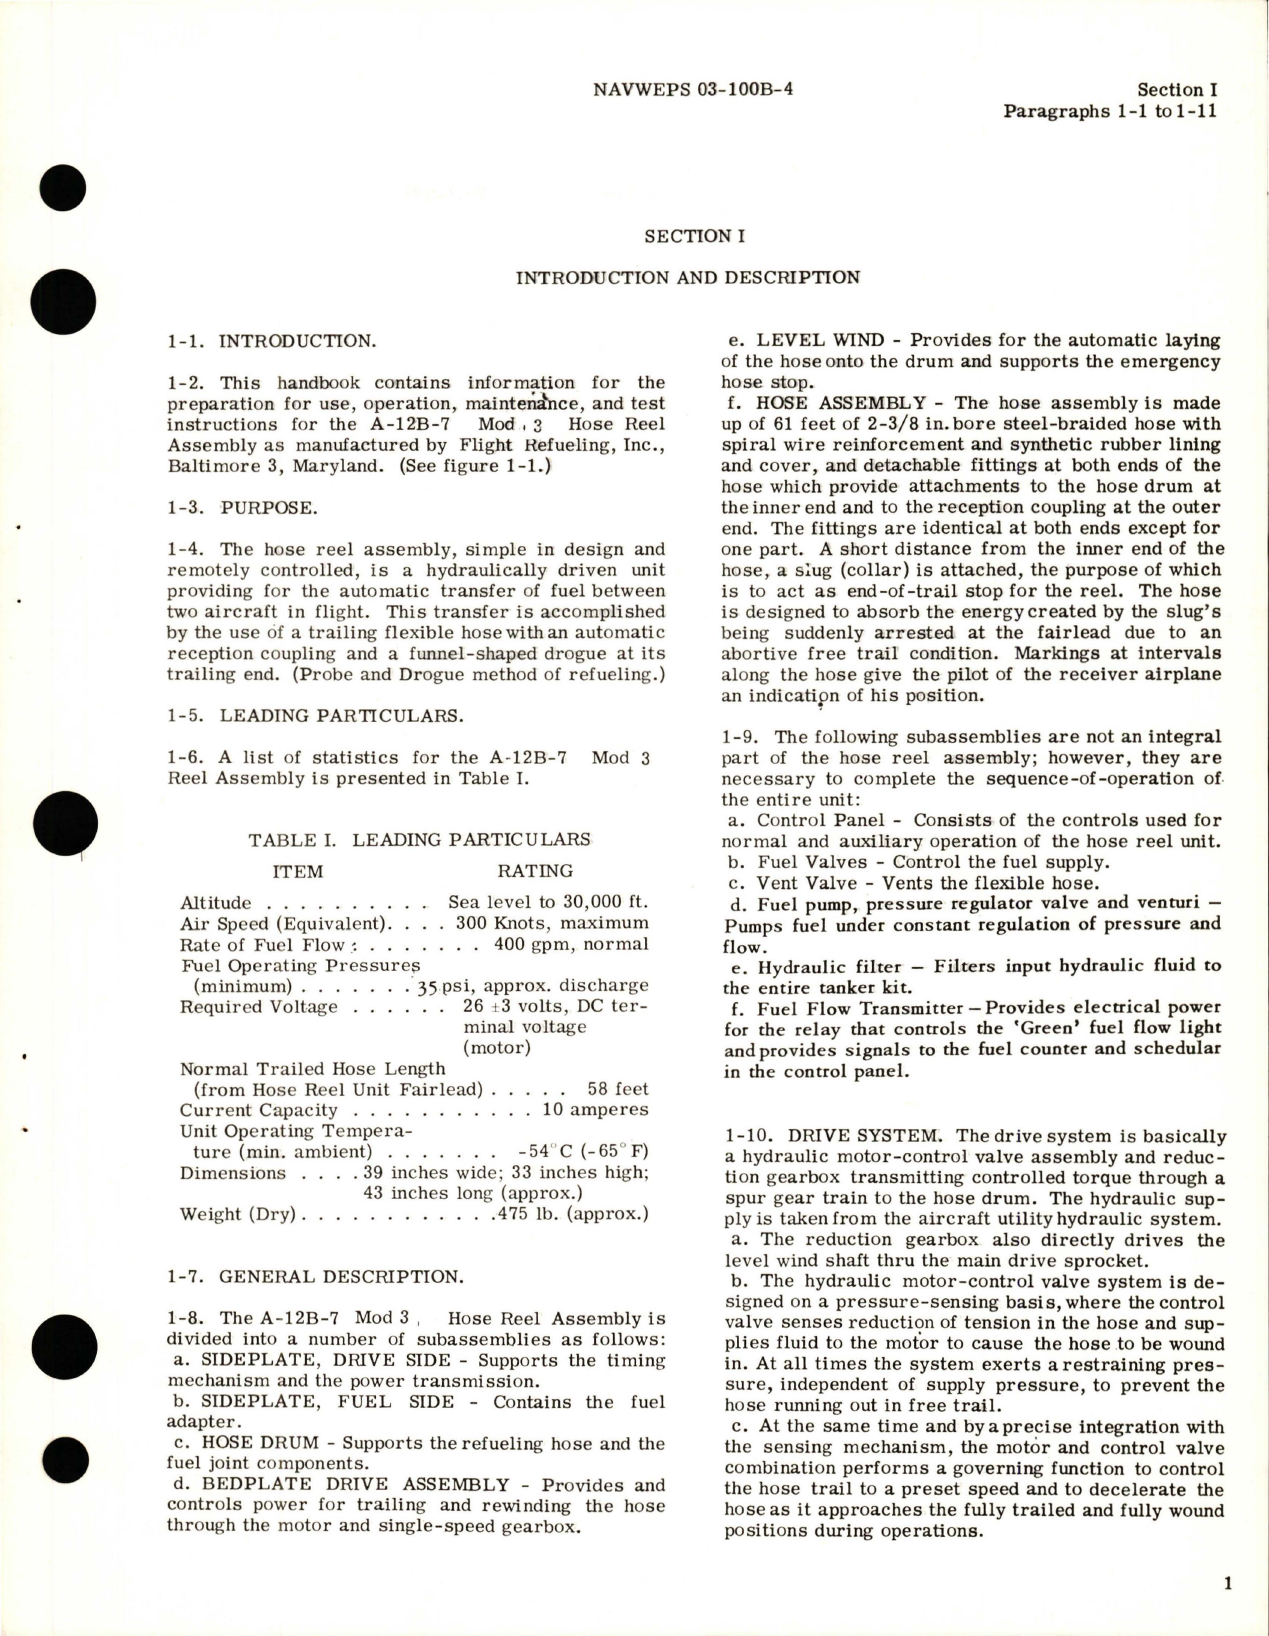 Sample page 7 from AirCorps Library document: Operation and Maintenance Instructions for Flight Pressure Refueling Hose Reel - A-12B-7 - Mod 3 - Part 216000